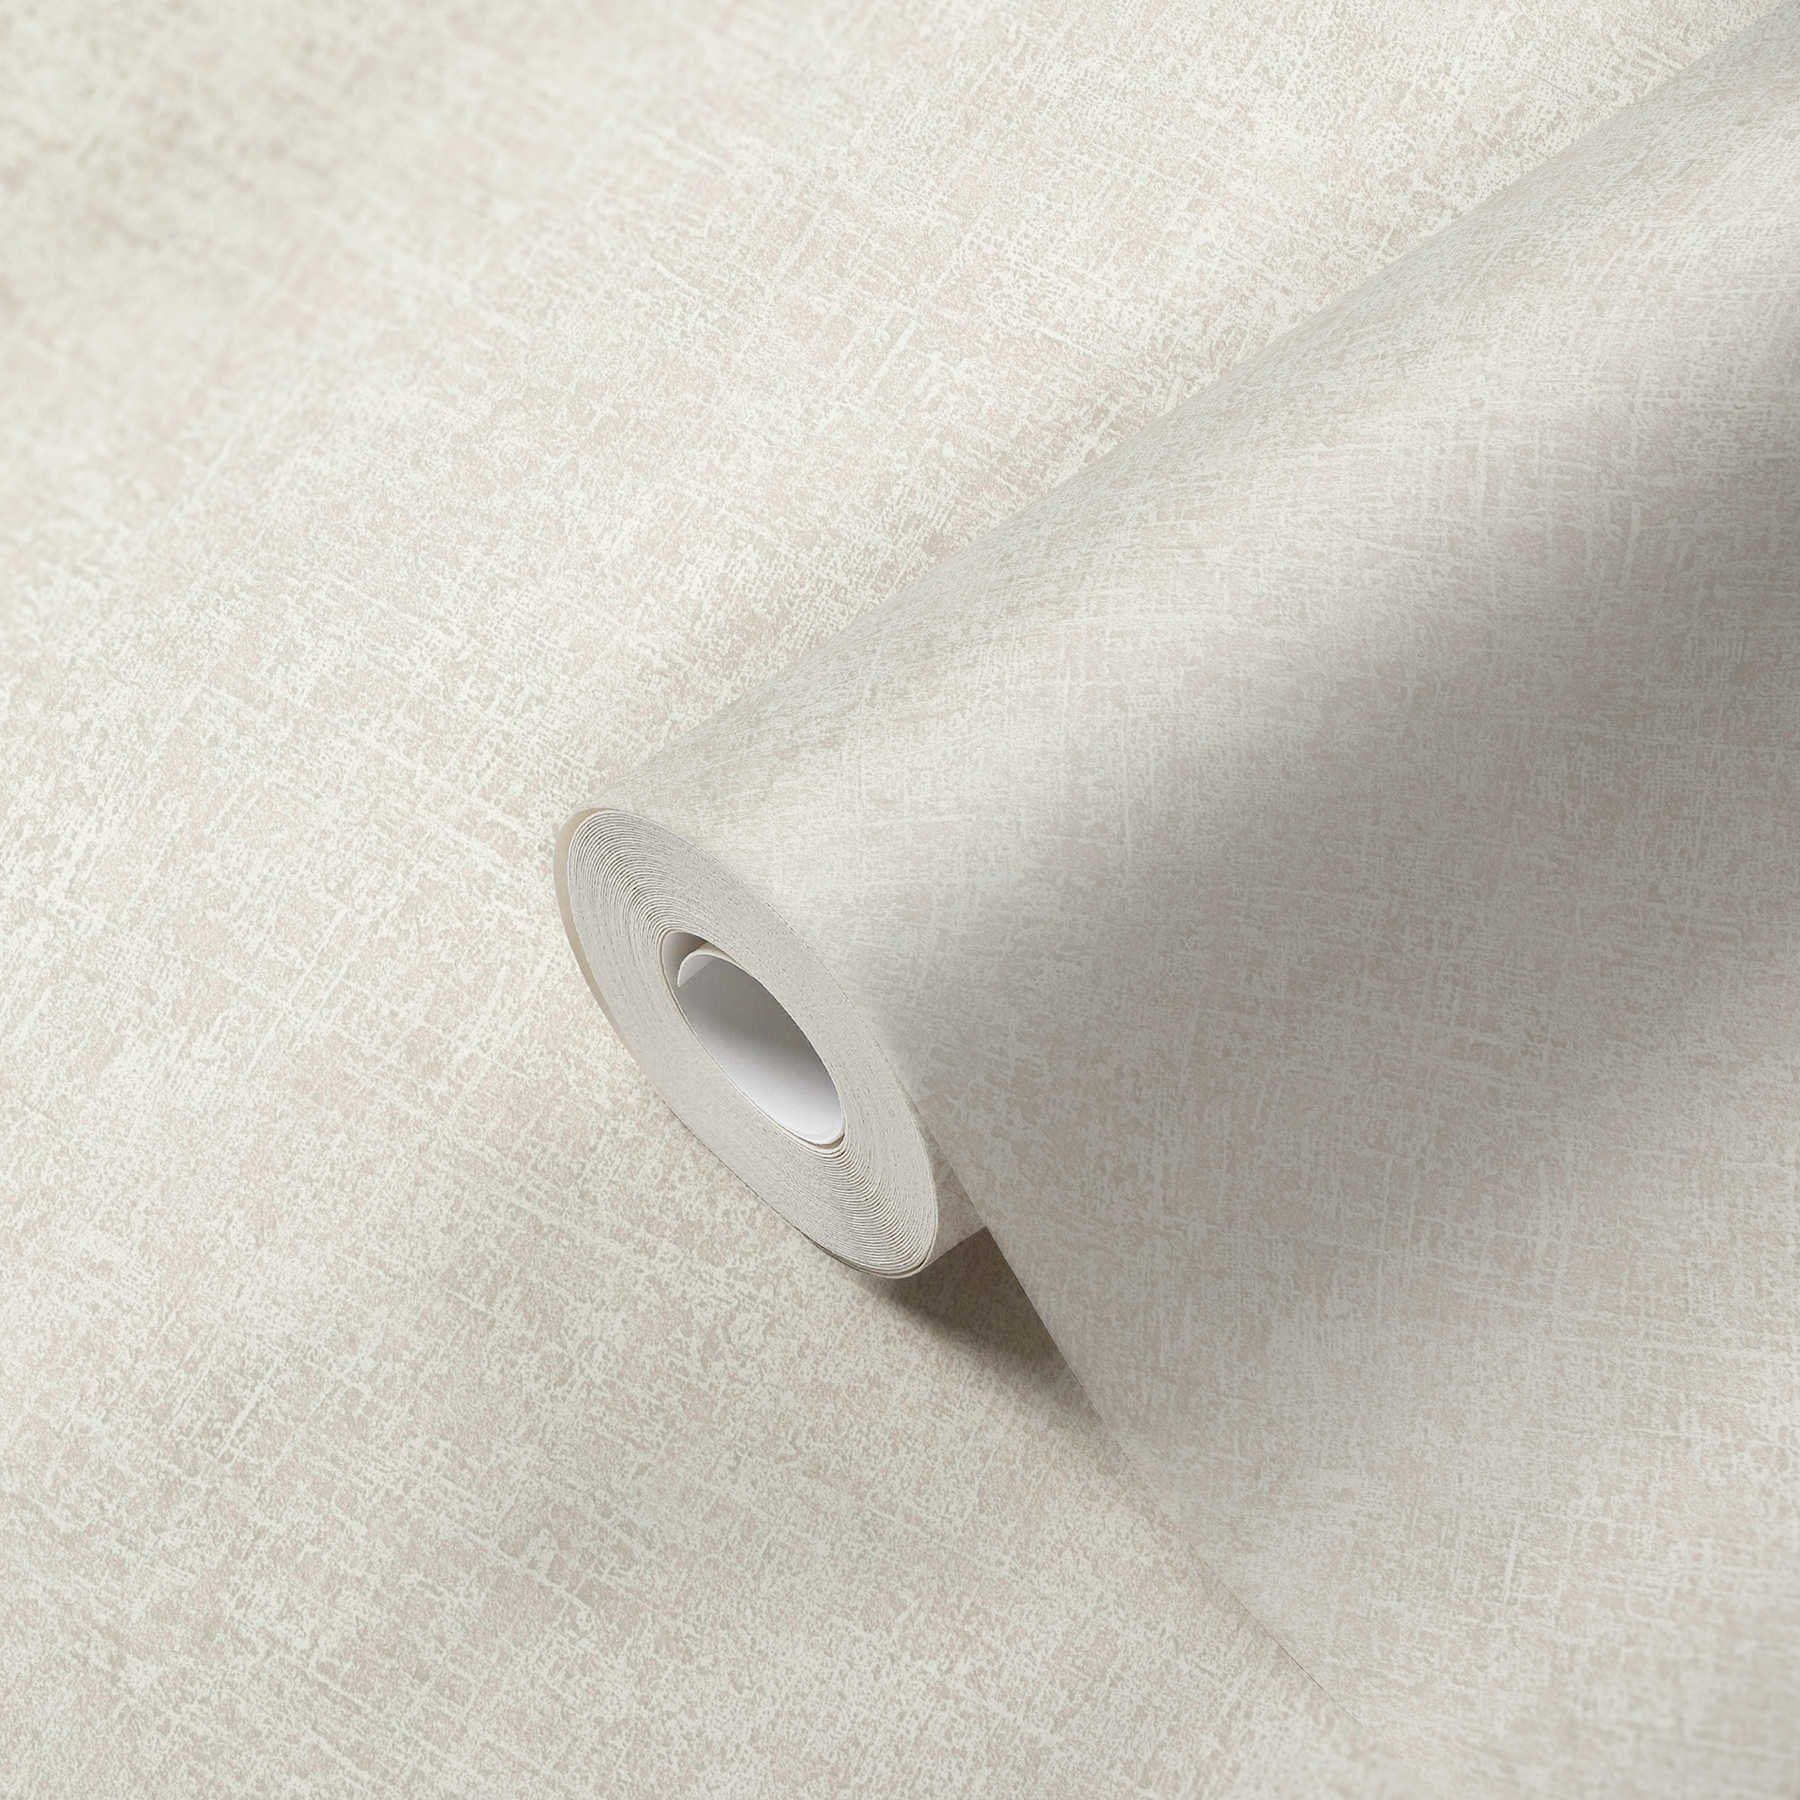             Plain white wallpaper with embossed structure
        